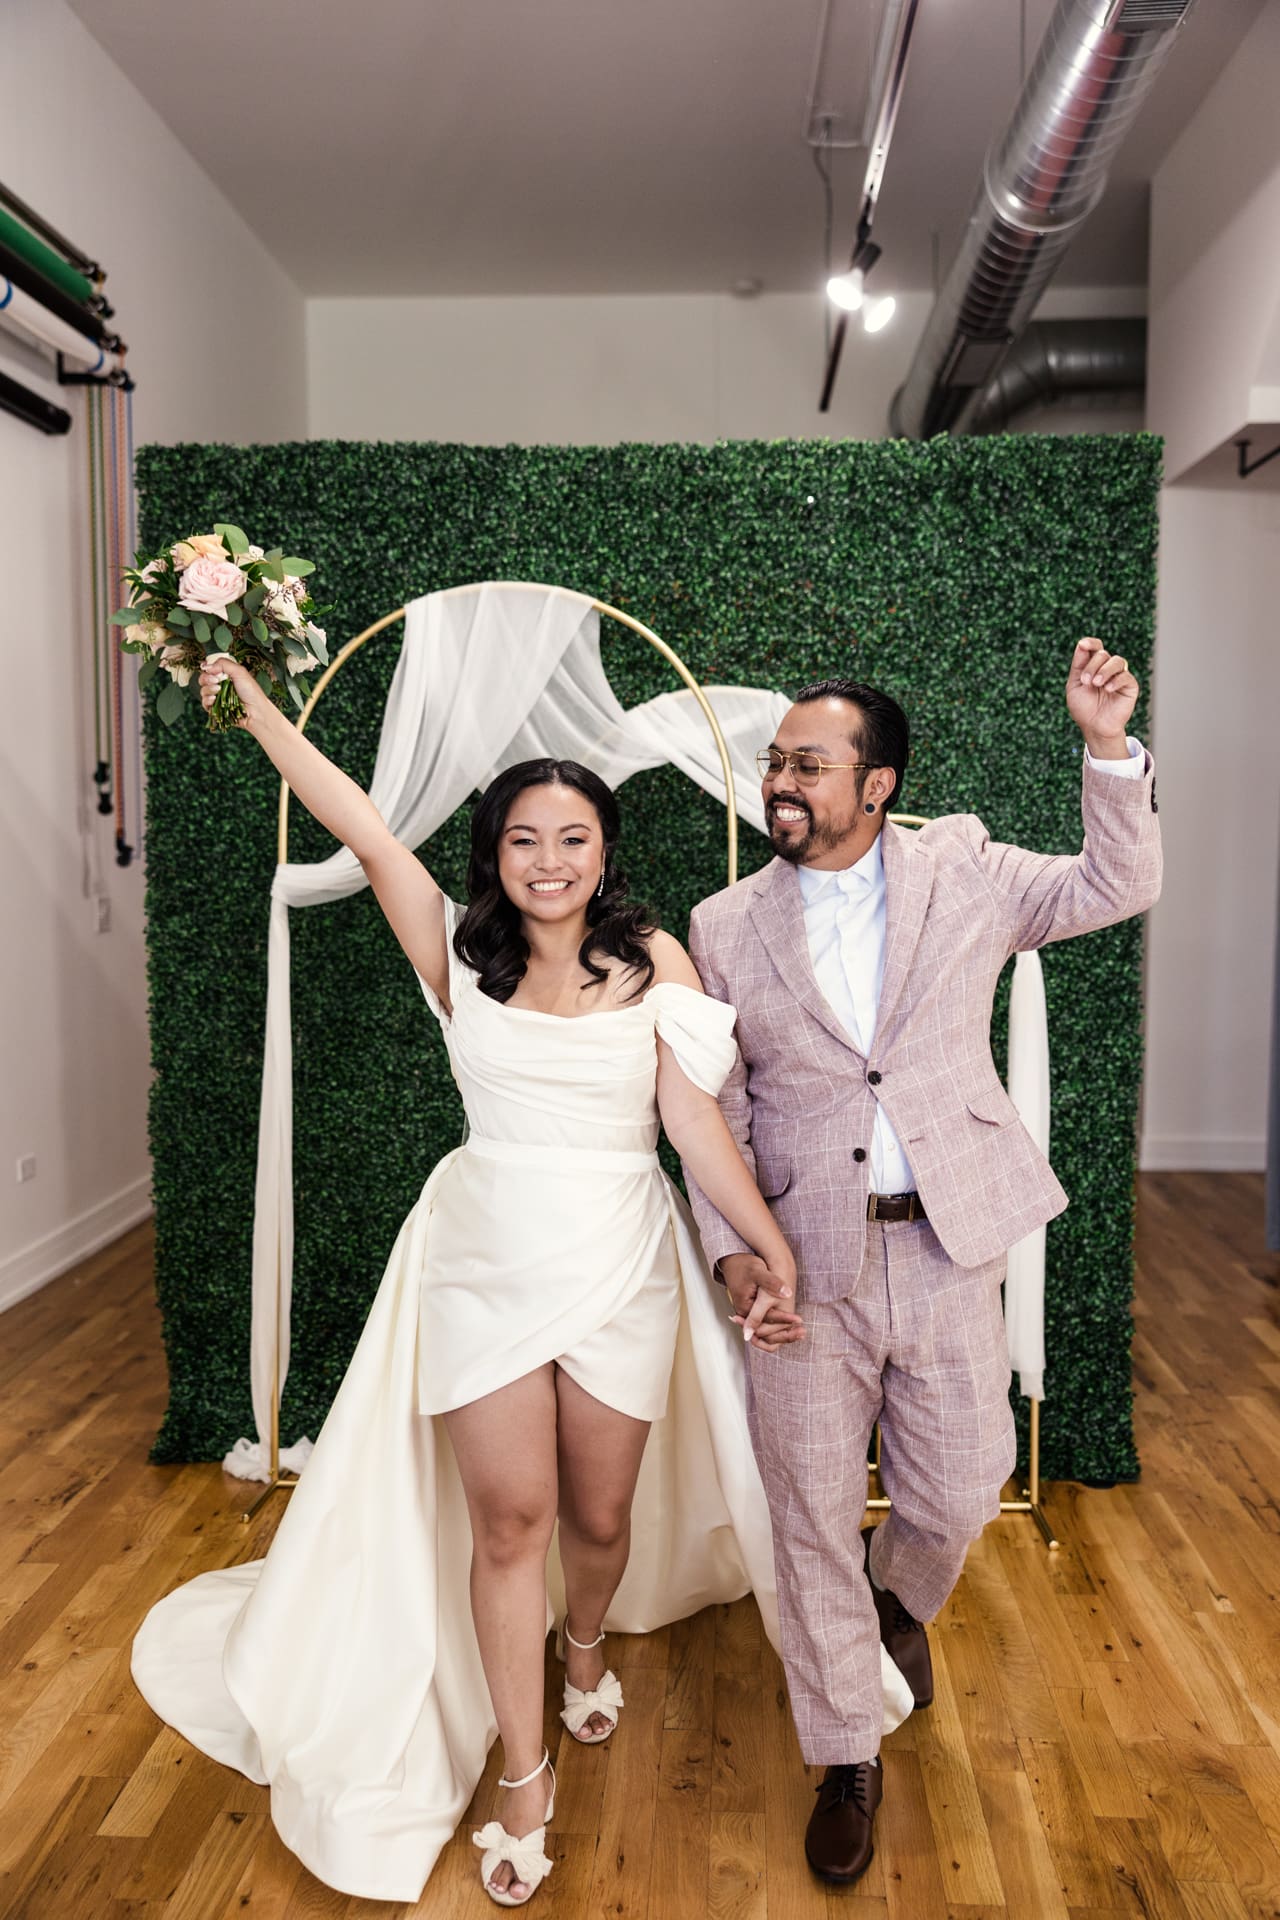 Just married bride and groom in front of gold arches and greenery wall after their intimate wedding ceremony at P&M Studio Chicago event space in West Town